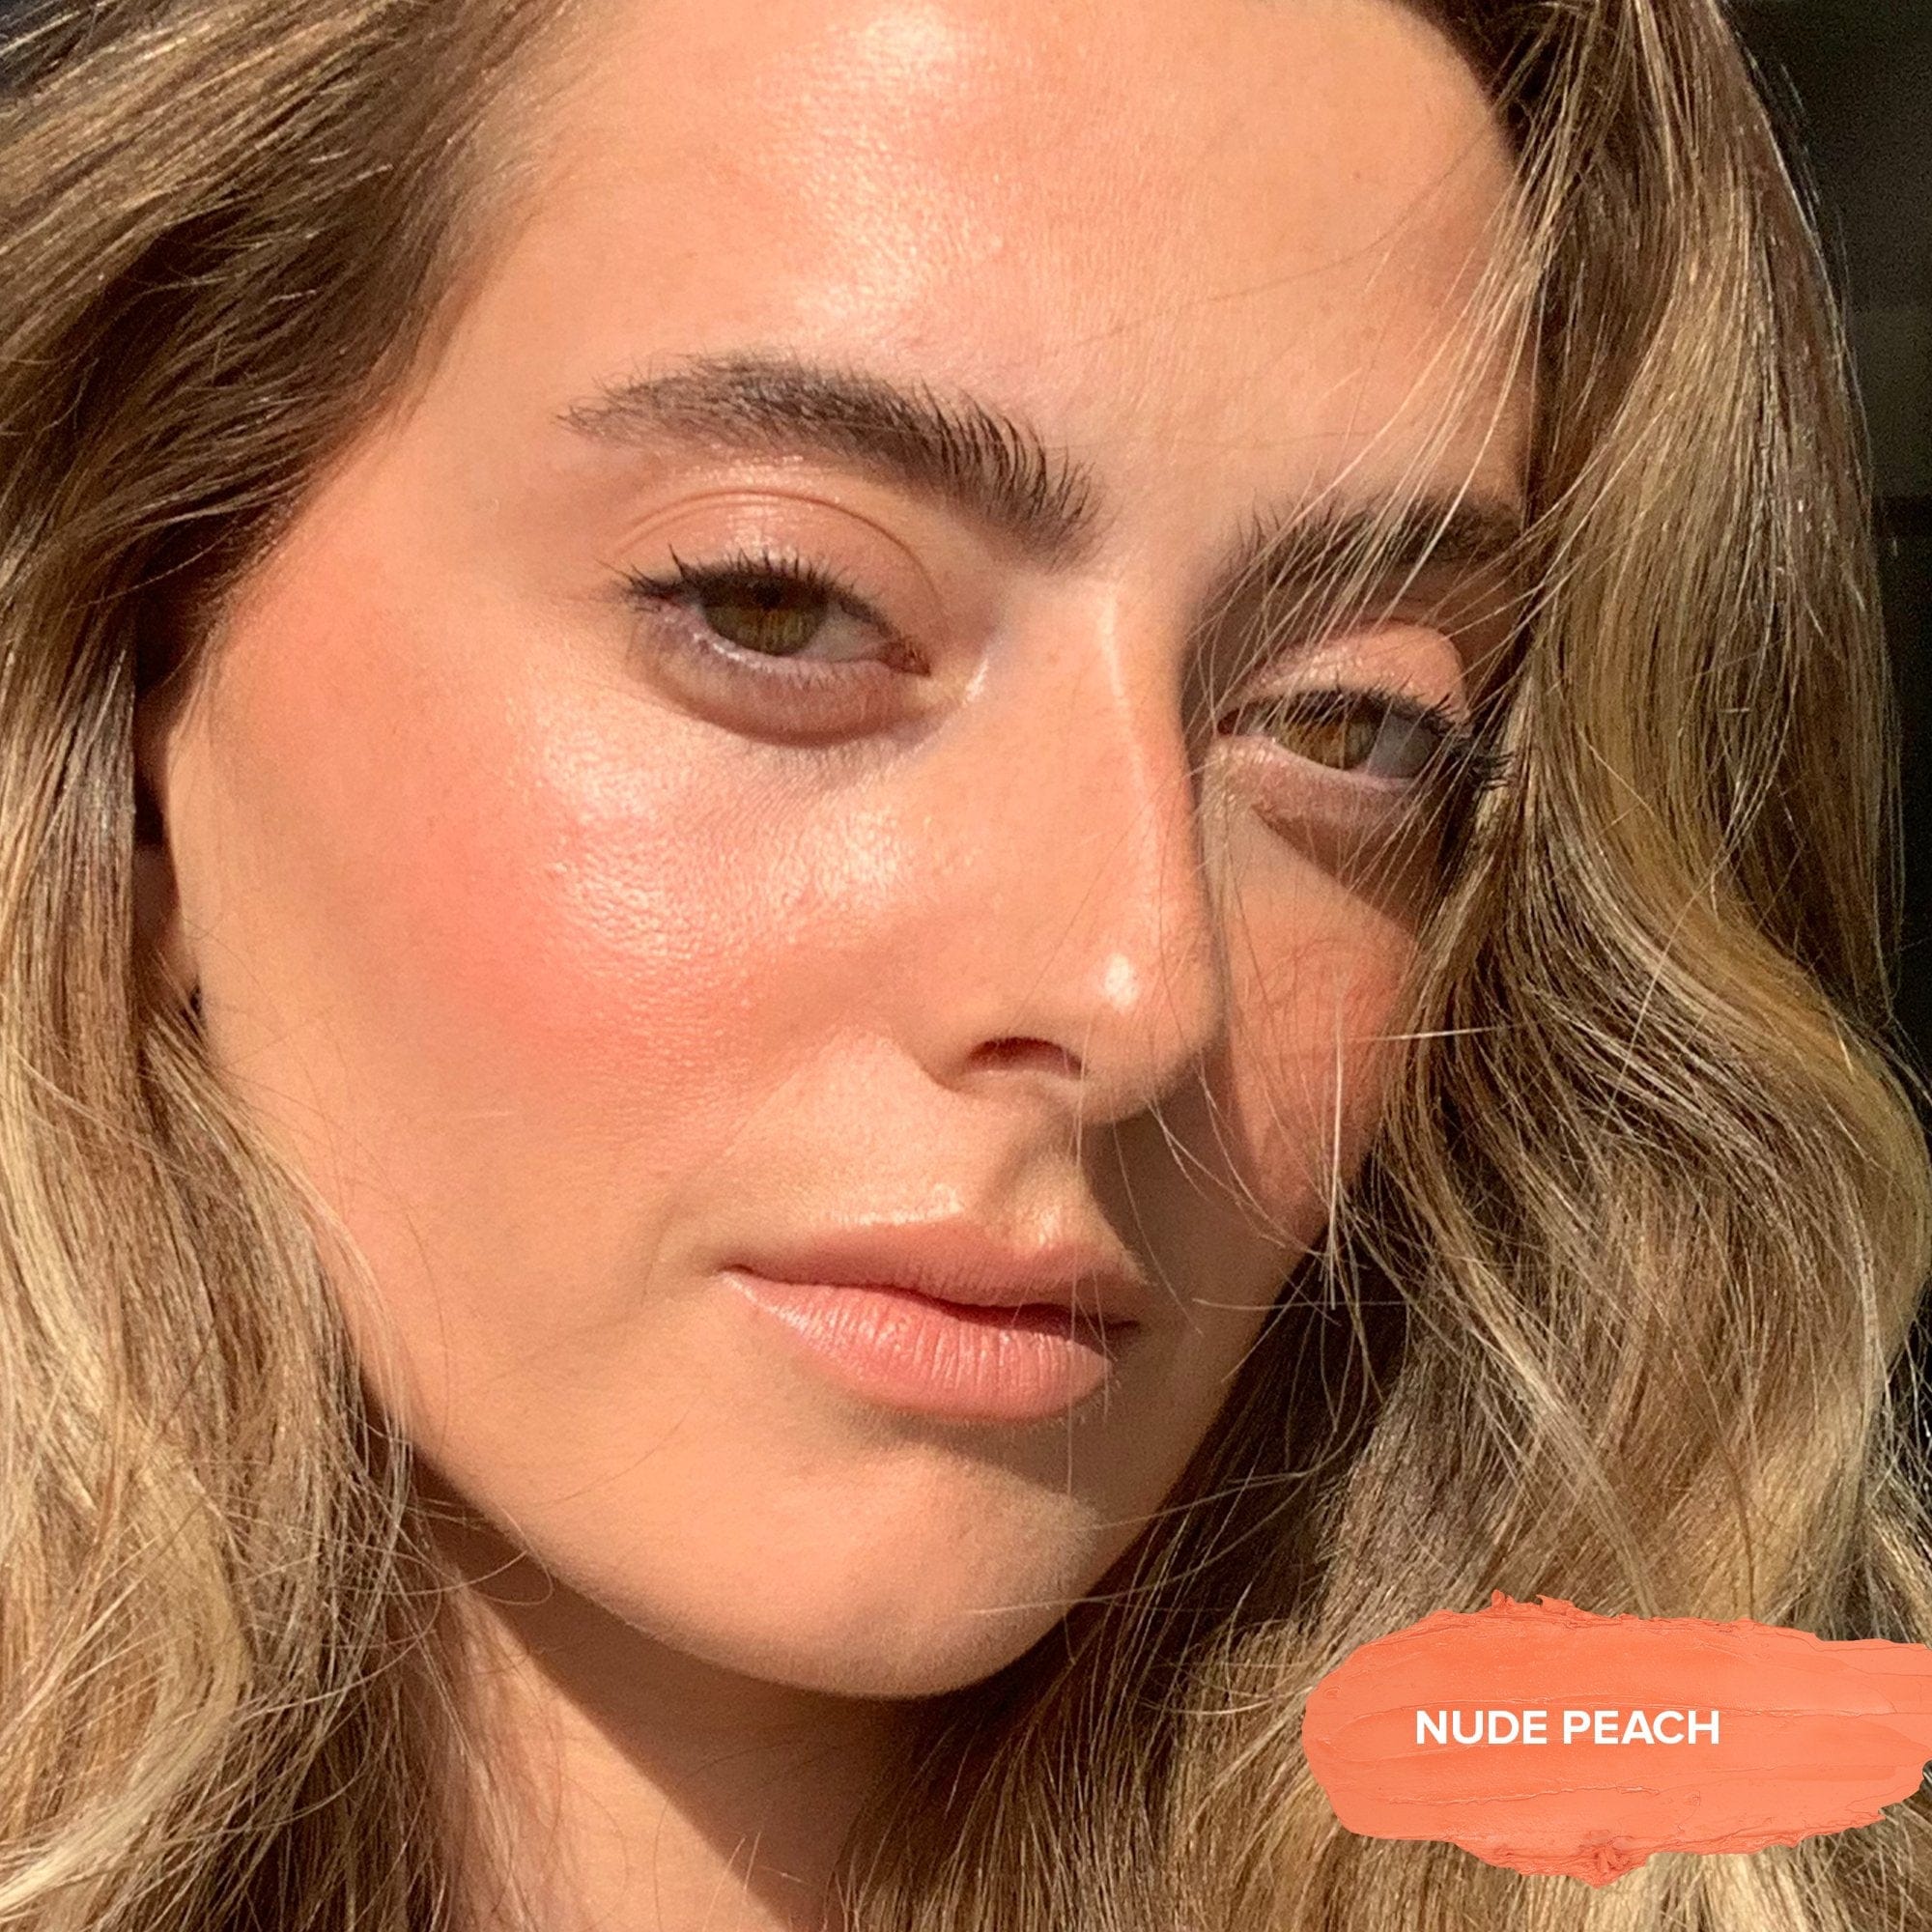 Taylor Frankel wearing Nudies Blush Stick in shade Nude Peach